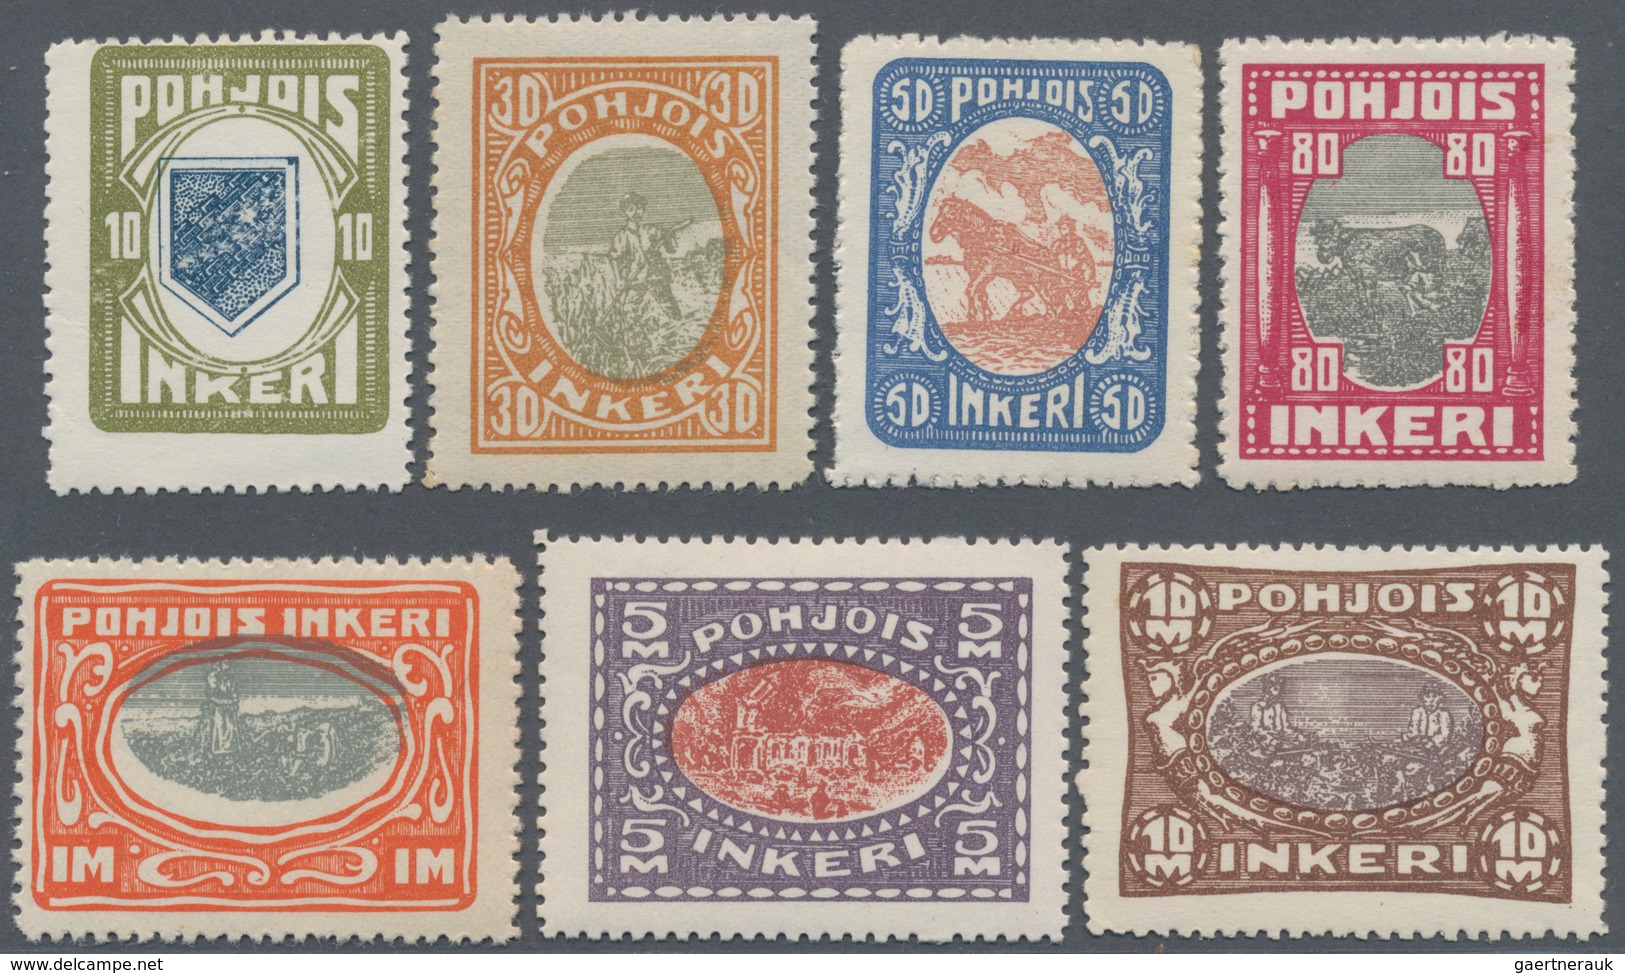 Nordingermanland: 1920, Definitive Issue (coat Of Arms, Harvesting, Agriculture, Church Etc.) In A L - Emisiones Locales